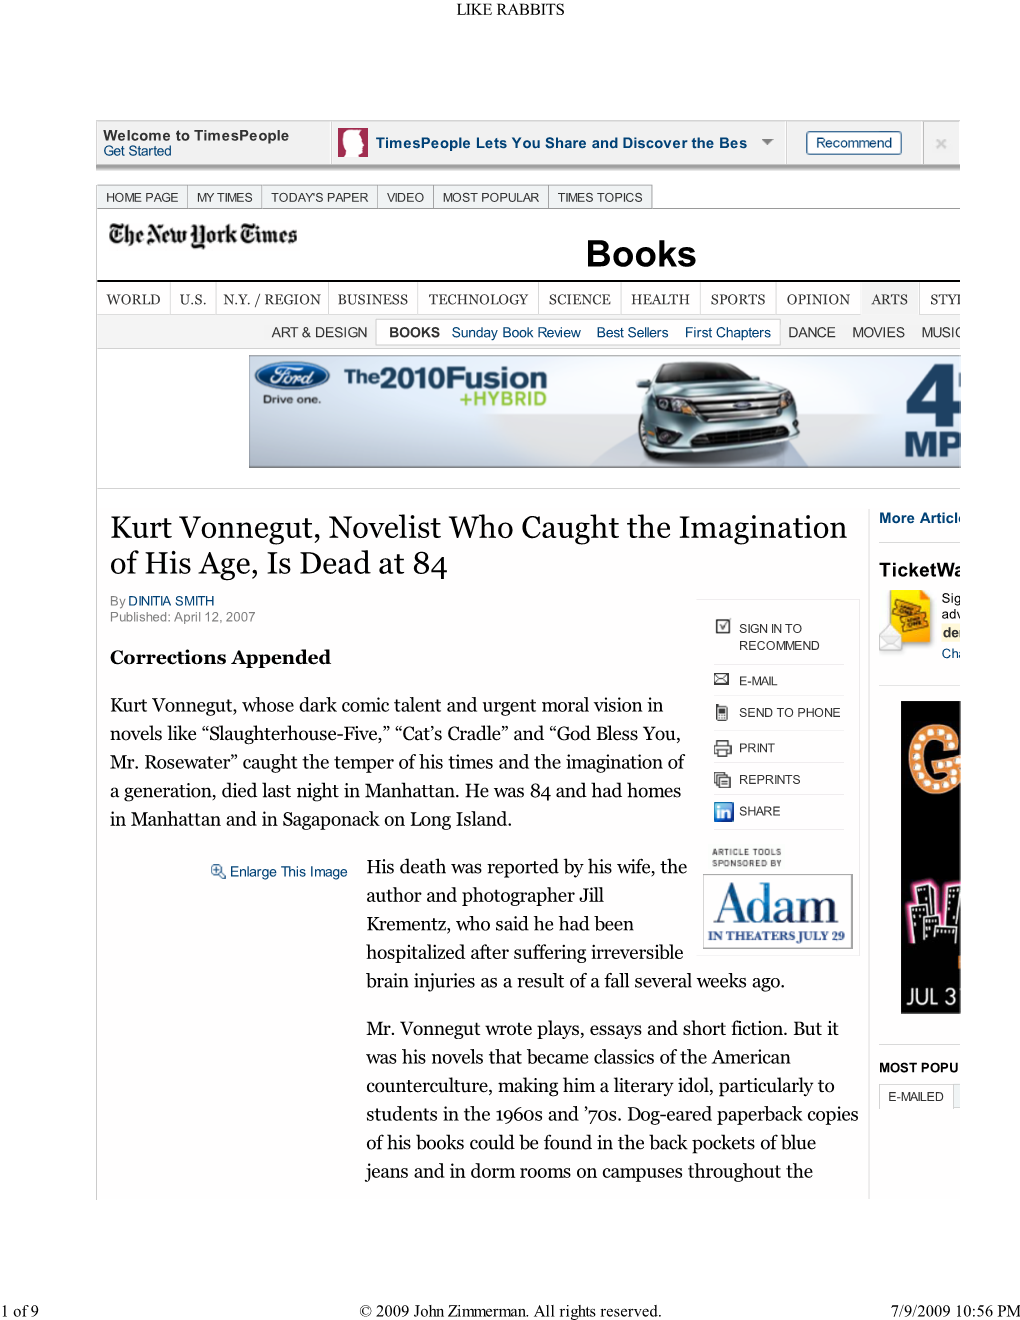 Kurt Vonnegut, Novelist Who Caught the Imagination More Article of His Age, Is Dead at 84 Ticketwa